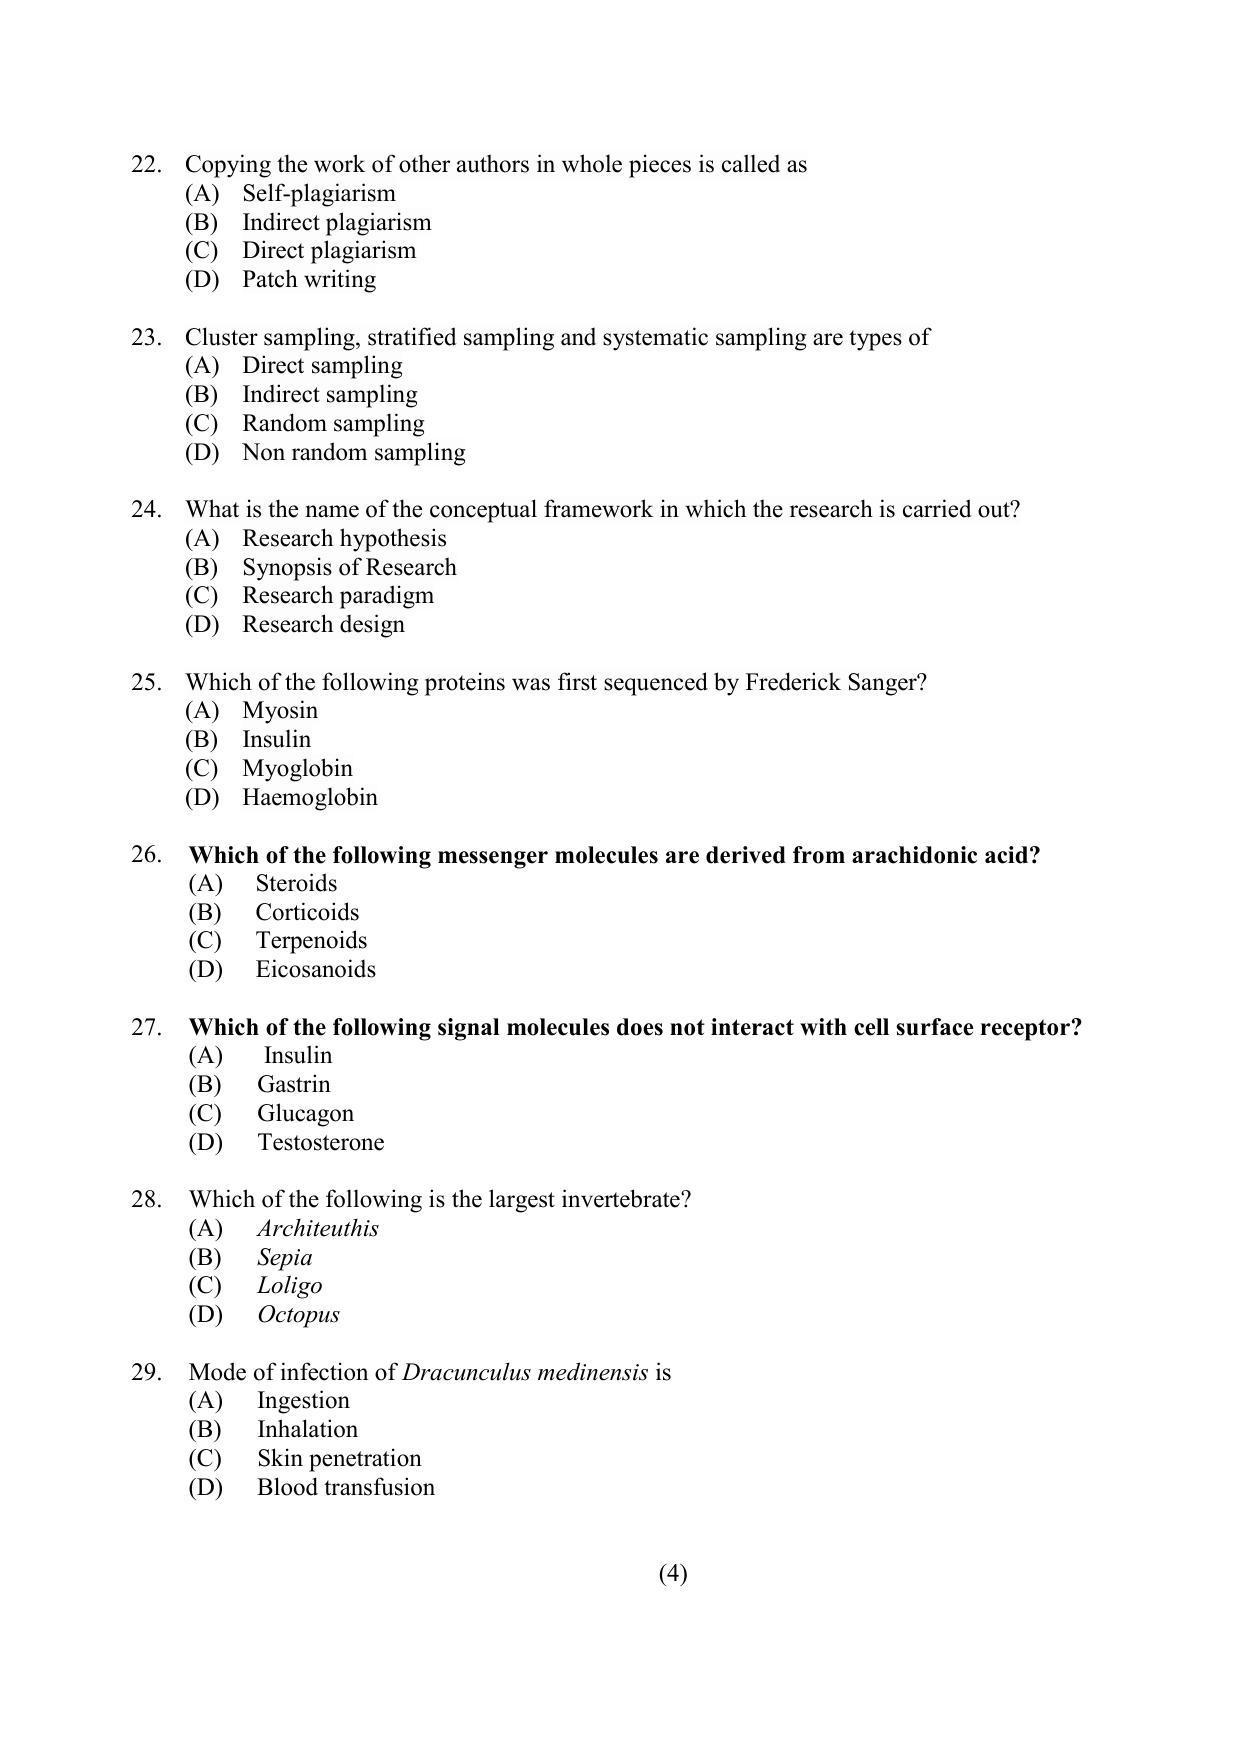 PU MPET Anthropology 2022 Question Papers - Page 83